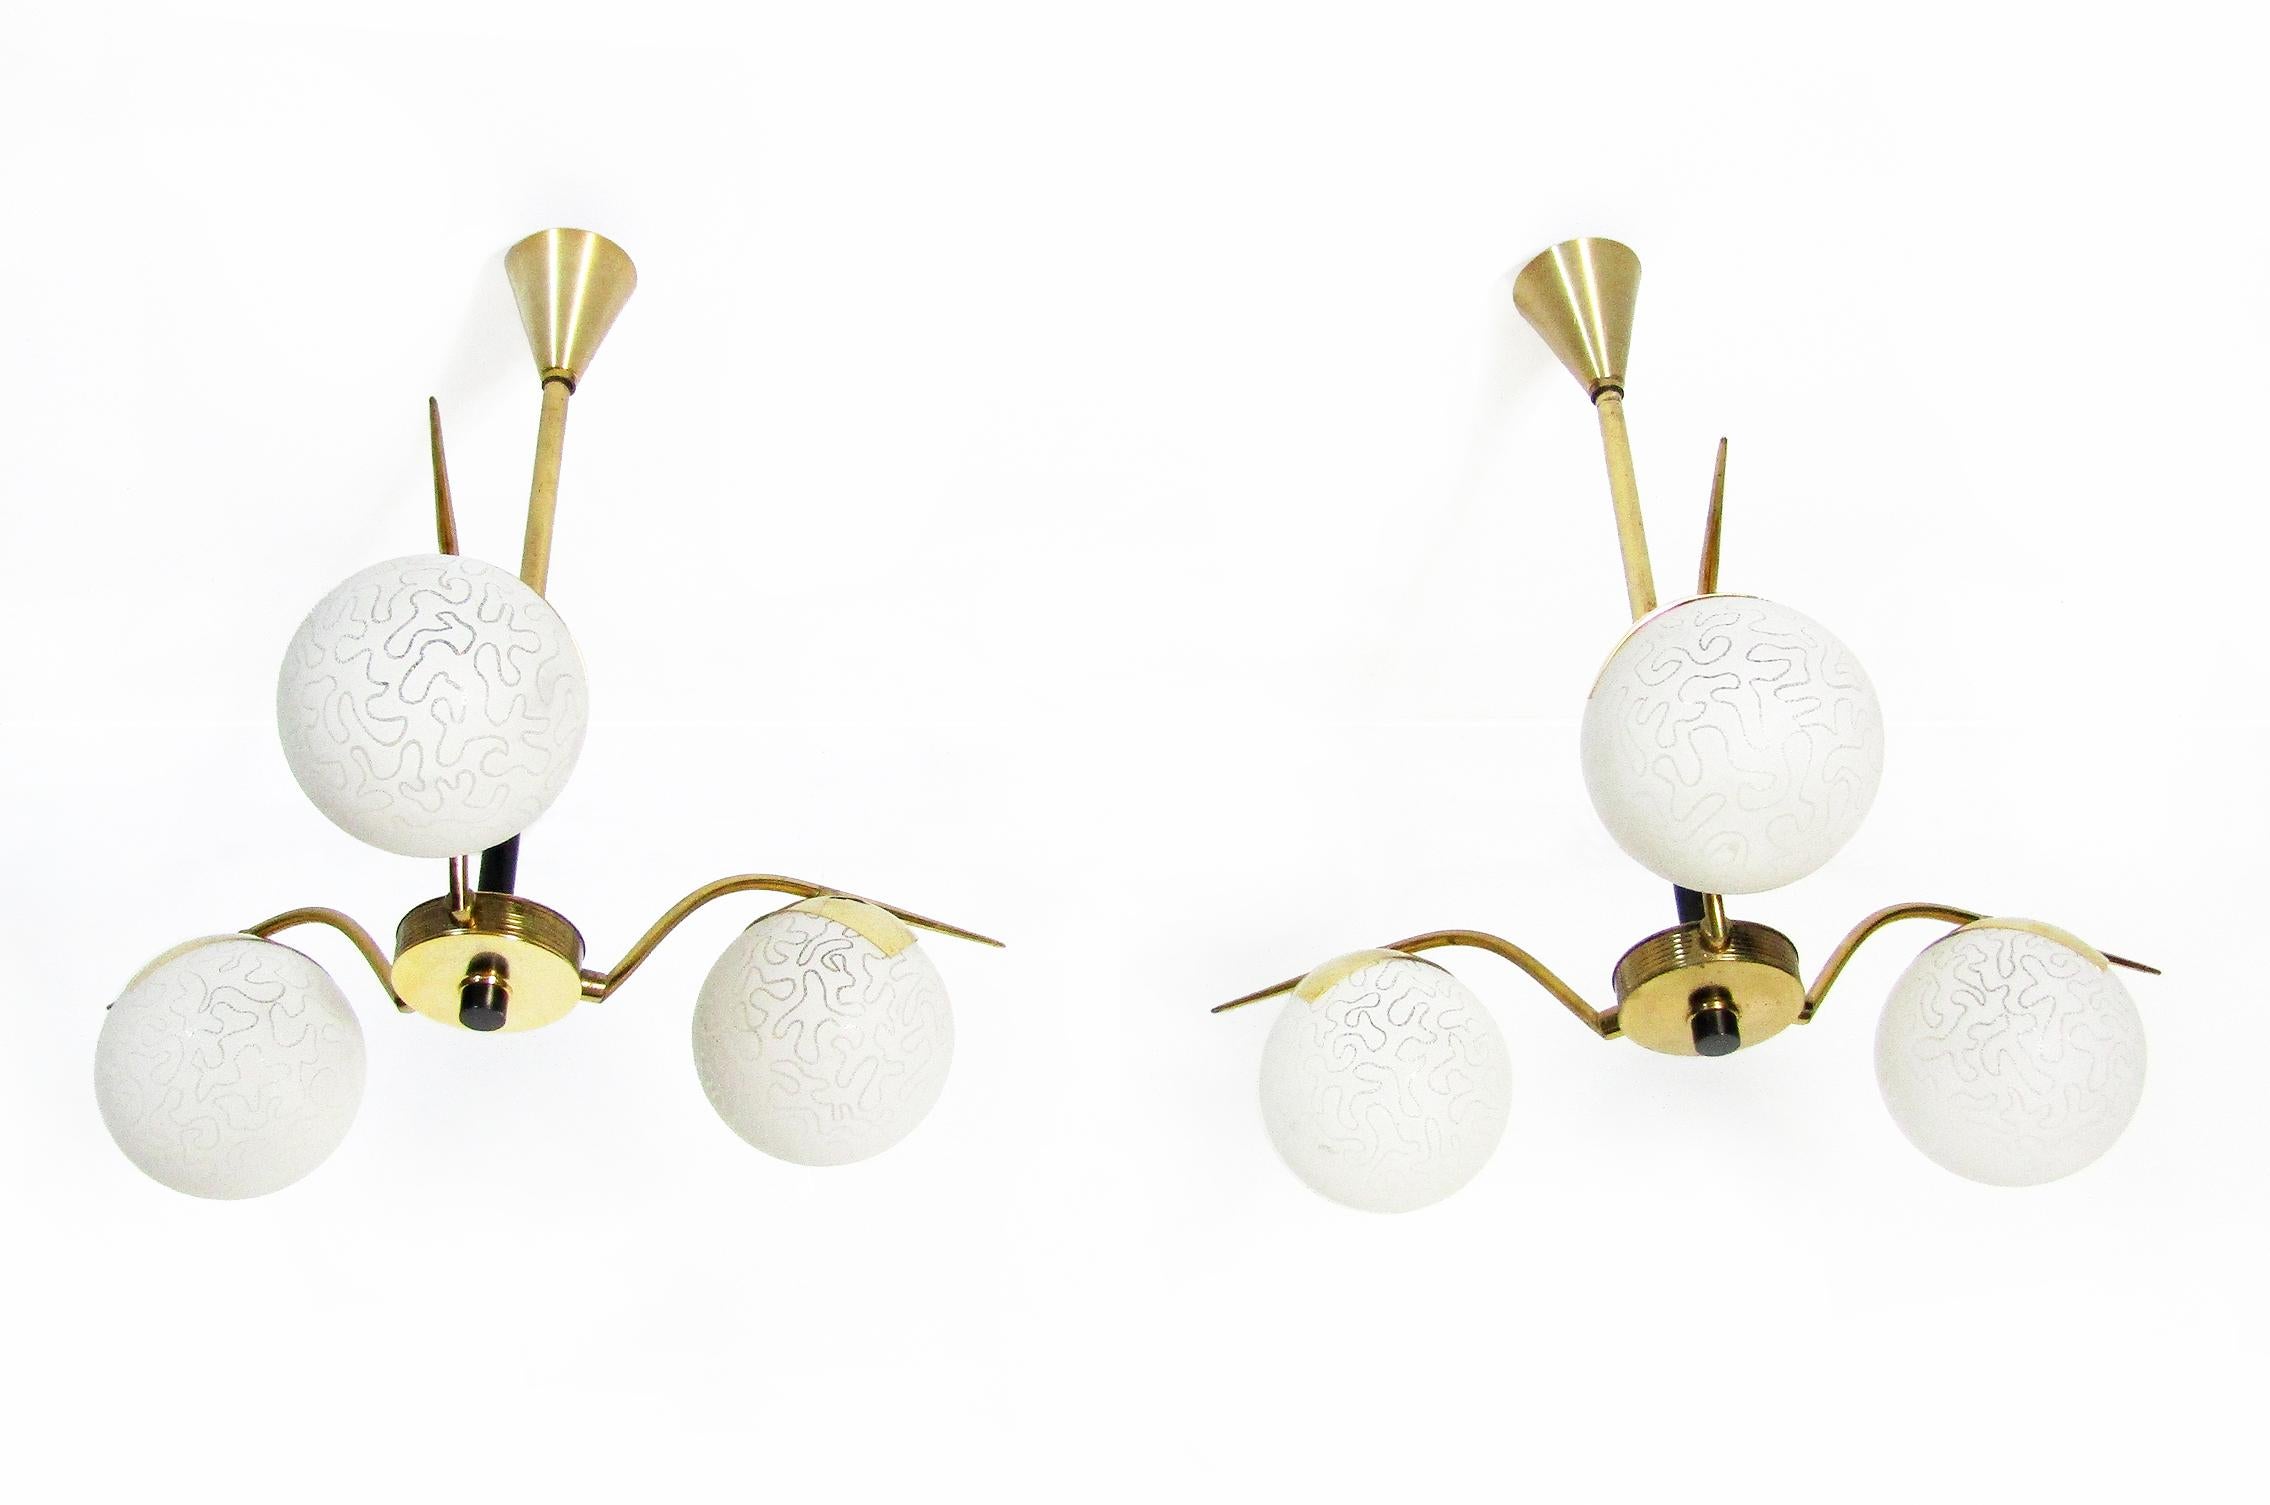 A pair of chic 1960s three-arm globe chandeliers by French makers Maison Arlus.

The shades are made from opaque matt glass with an organic etched design. They are held on angular brass arms with stylish brass holders.

In perfect working